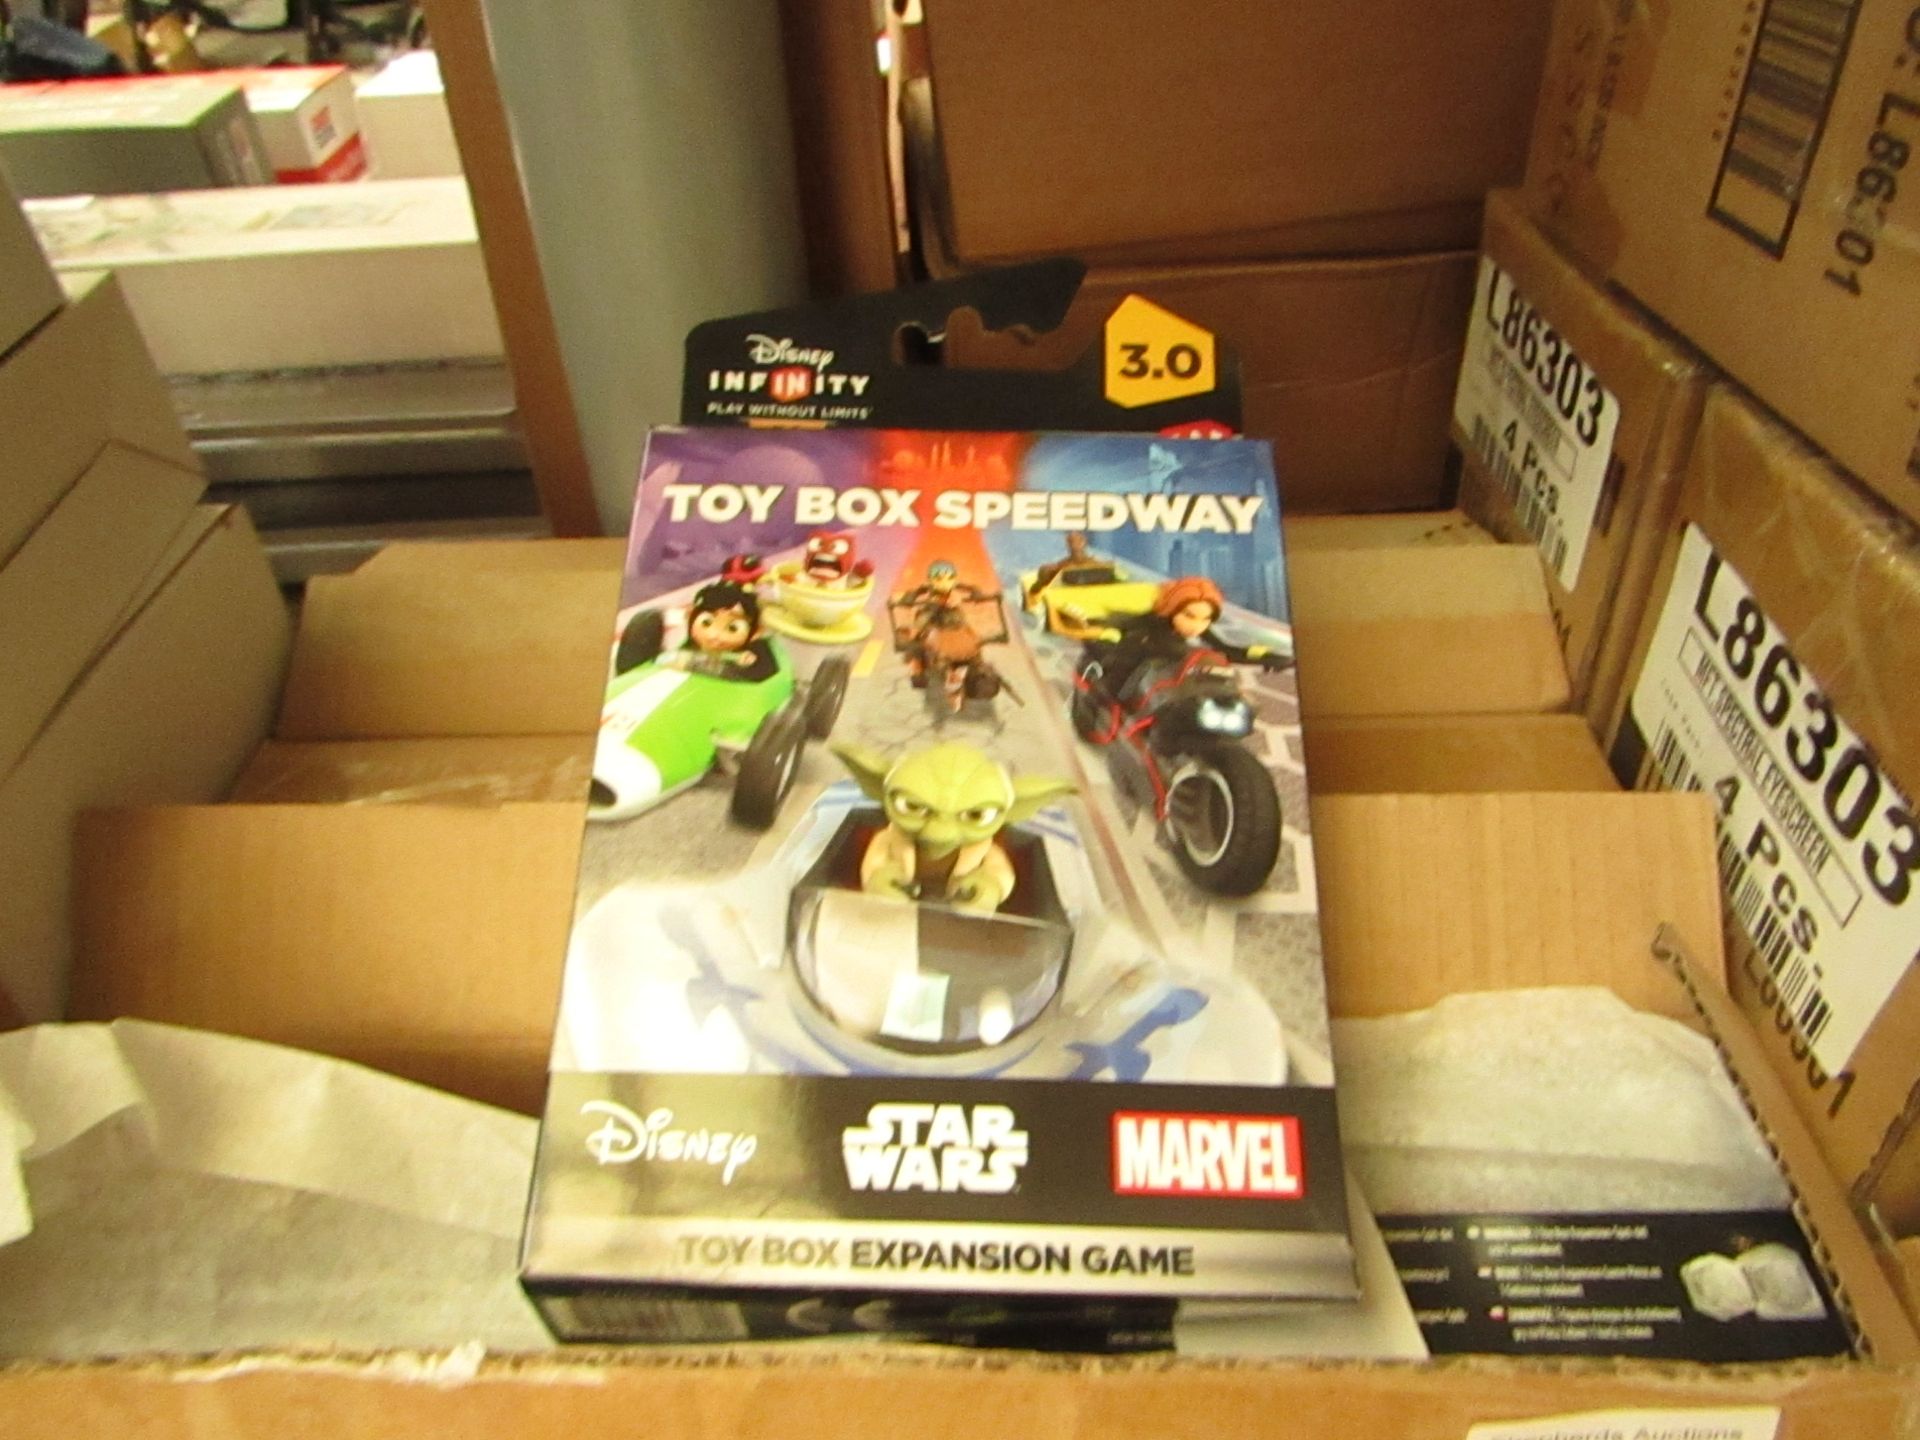 Box Containing 6 X Disney Toy Box Expansion Game,all packaged